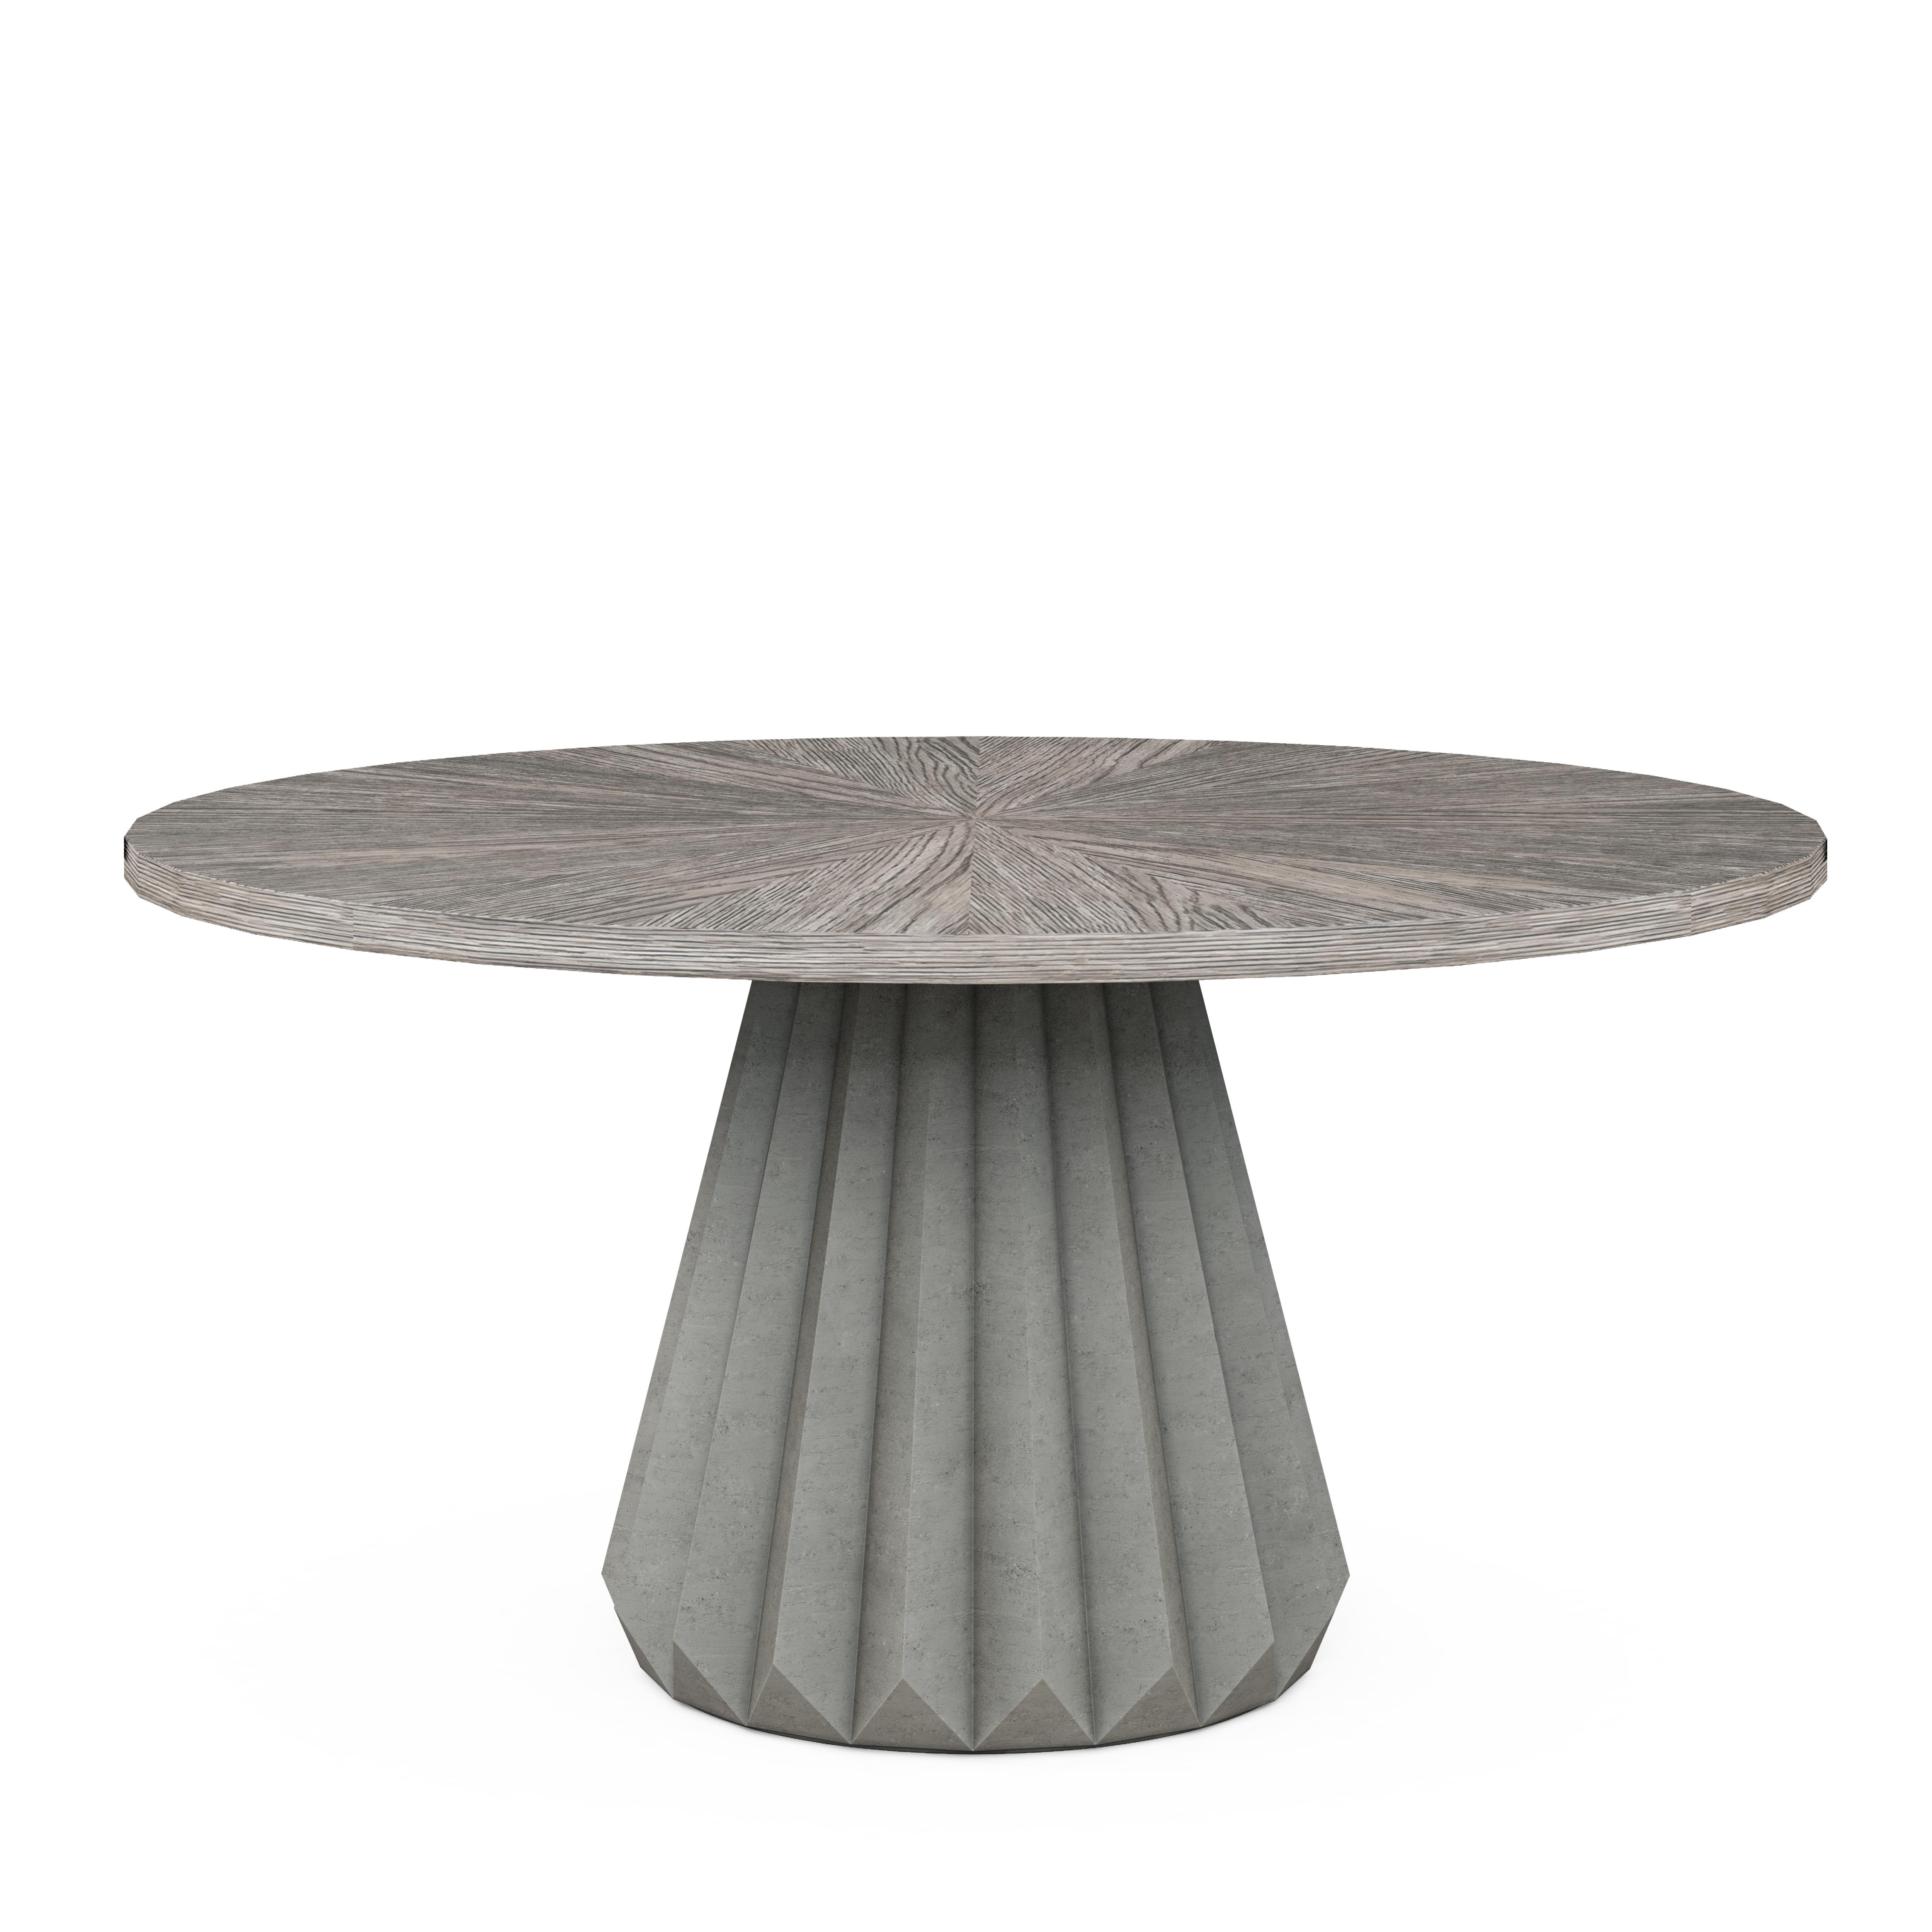 Modern, Casual Dining Table Vault 285225-2354 in Gray 